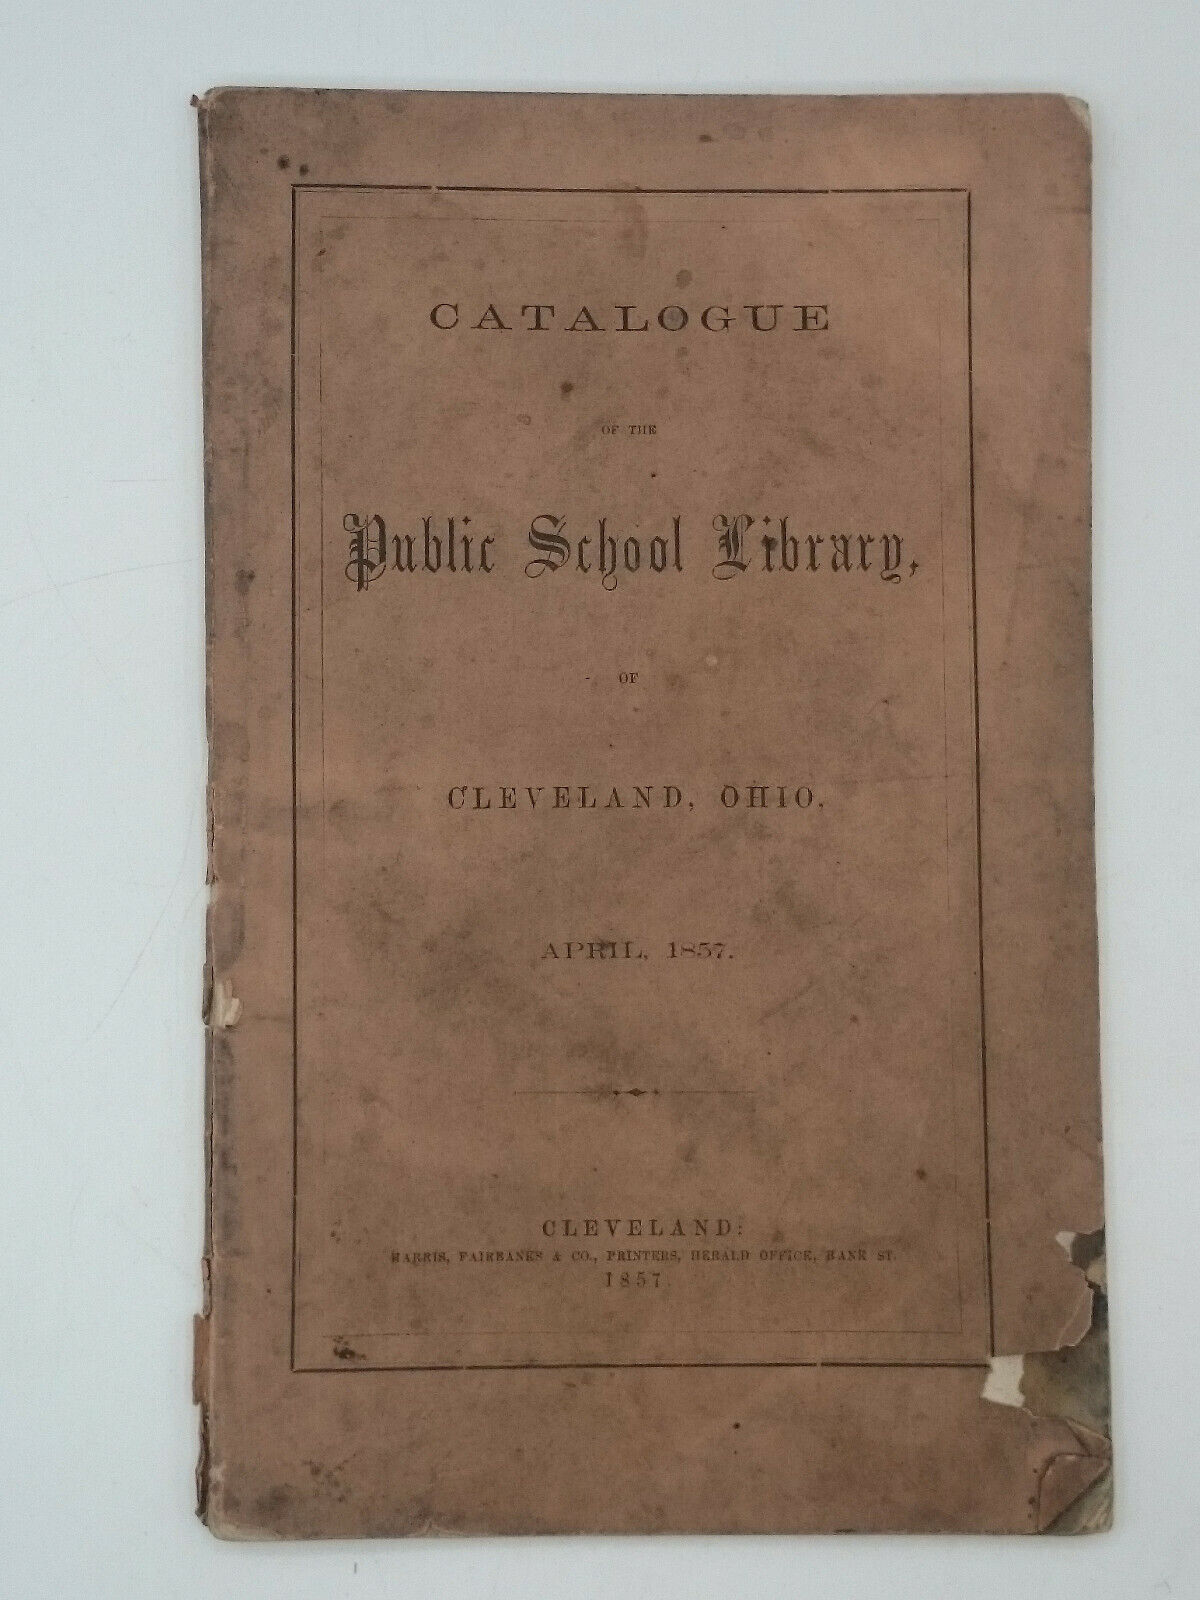 RARE 1857 CLEVELAND PUBLIC SCHOOL LIBRARY CATALOGUE LIST w Chas Dickens & Others